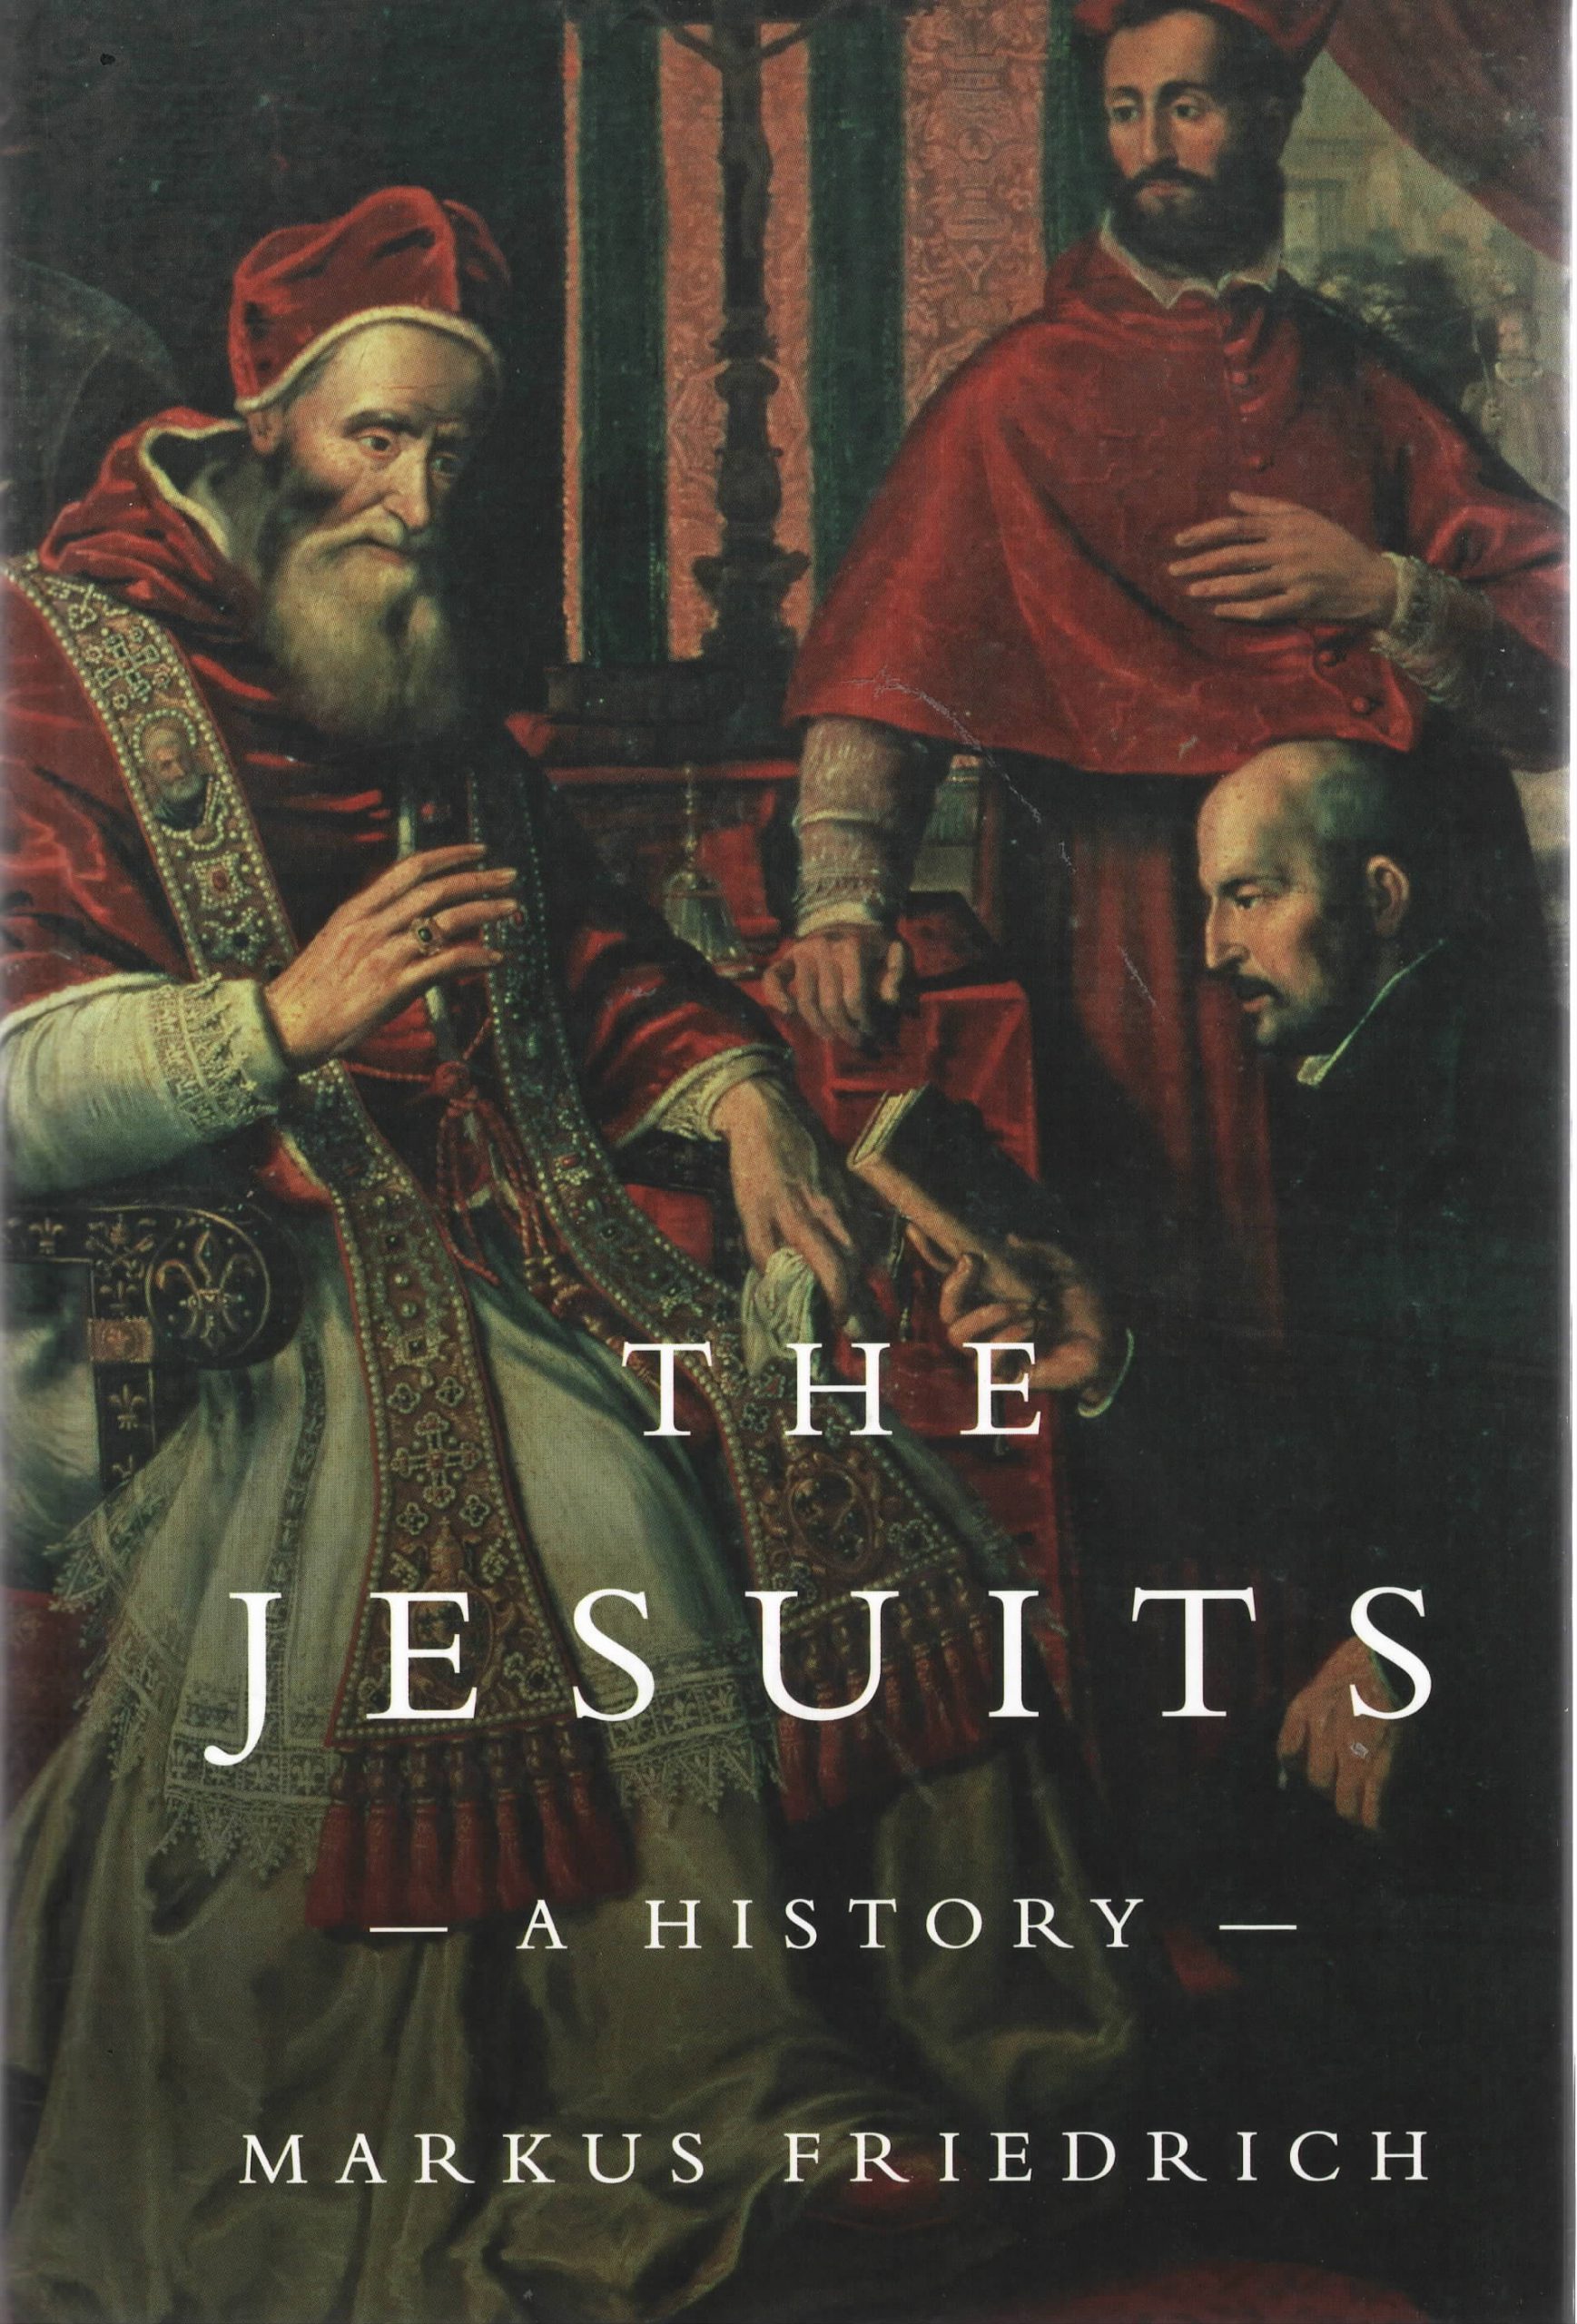 The Jesuits: a history